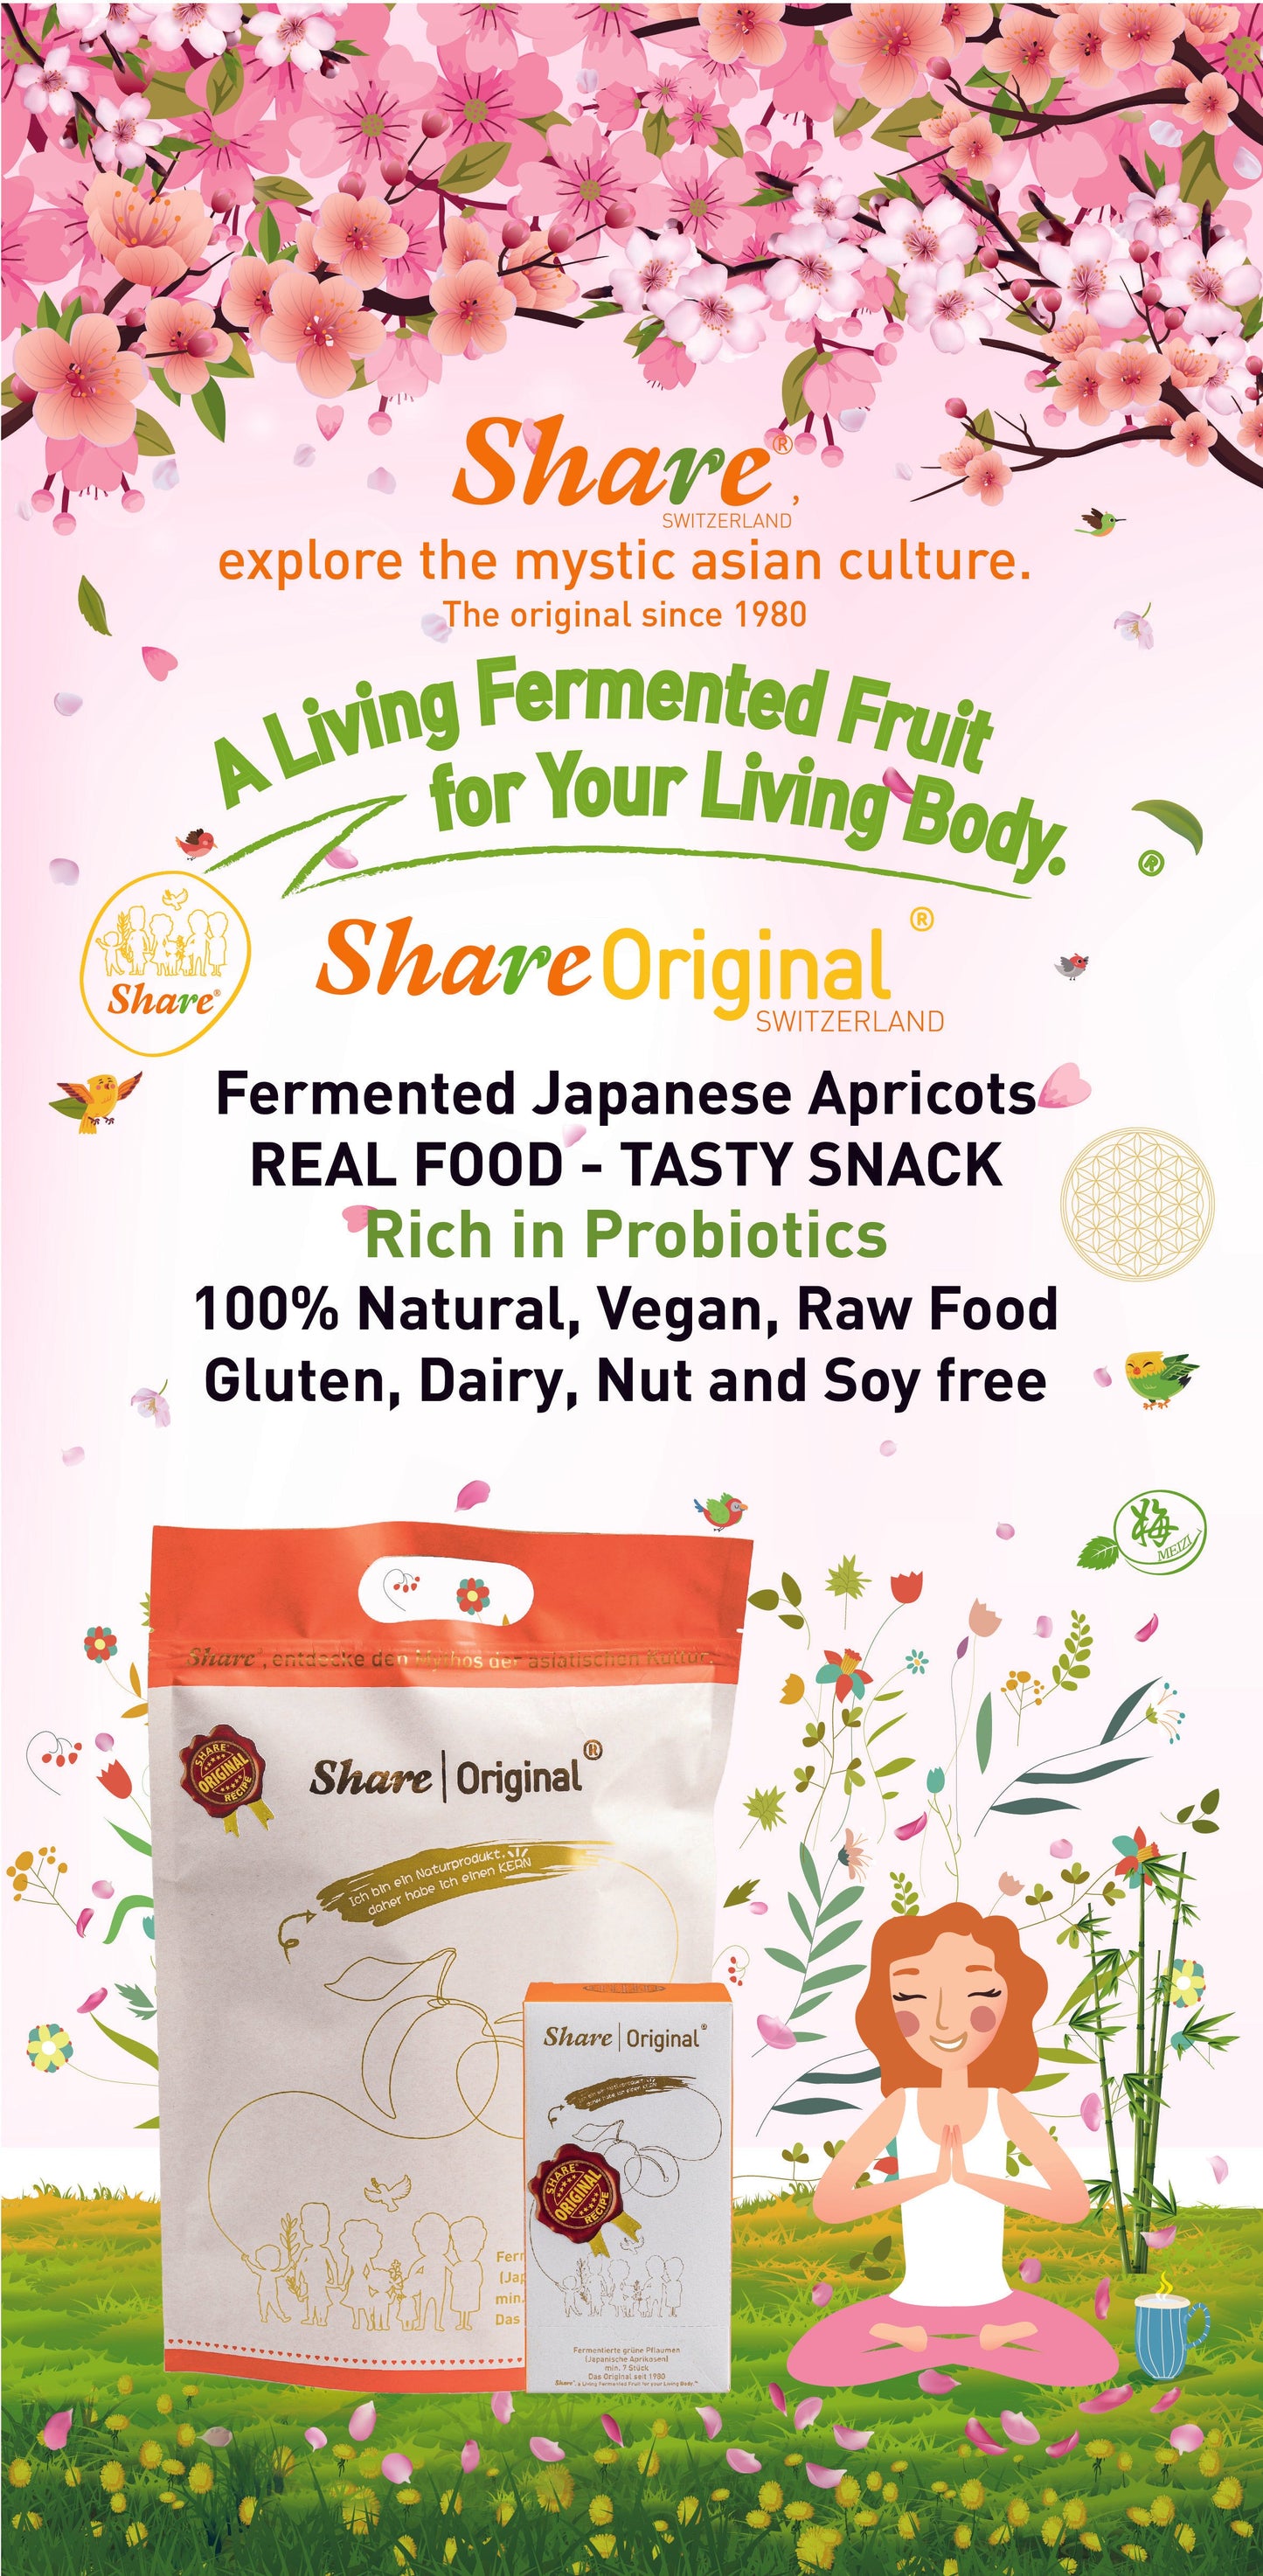 Share Original® Fermented Plum/Japanese Apricot (Organza Bag, 33pcs): 30+month naturally fermented, effective natural alternative to lab-made laxatives & probiotics, vegan & non-GMO, individually wrapped packet easy for travel (Swiss-made, free shipping)